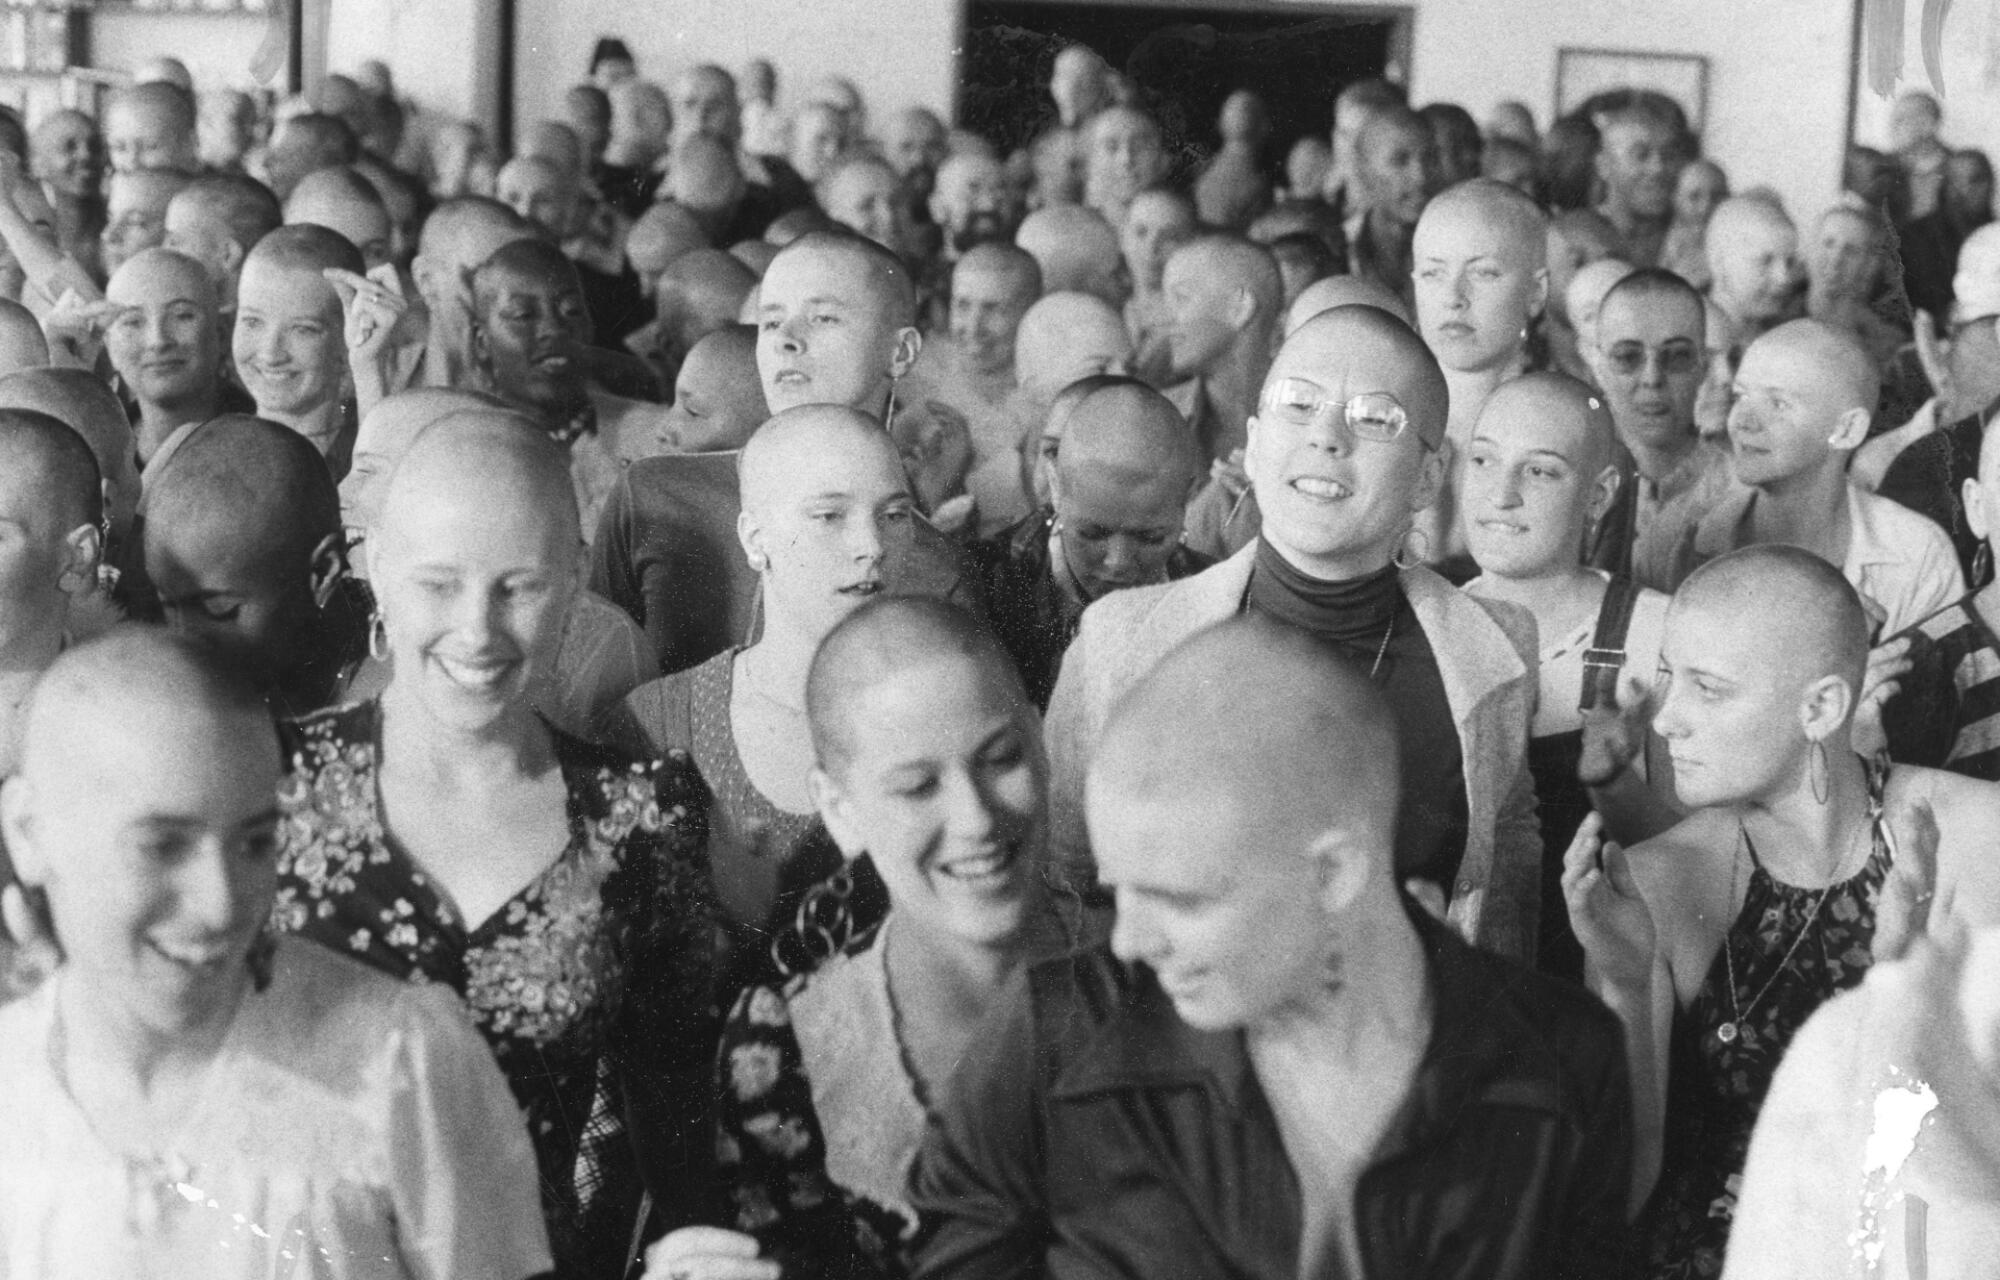 A large group of people, most with shaved heads.